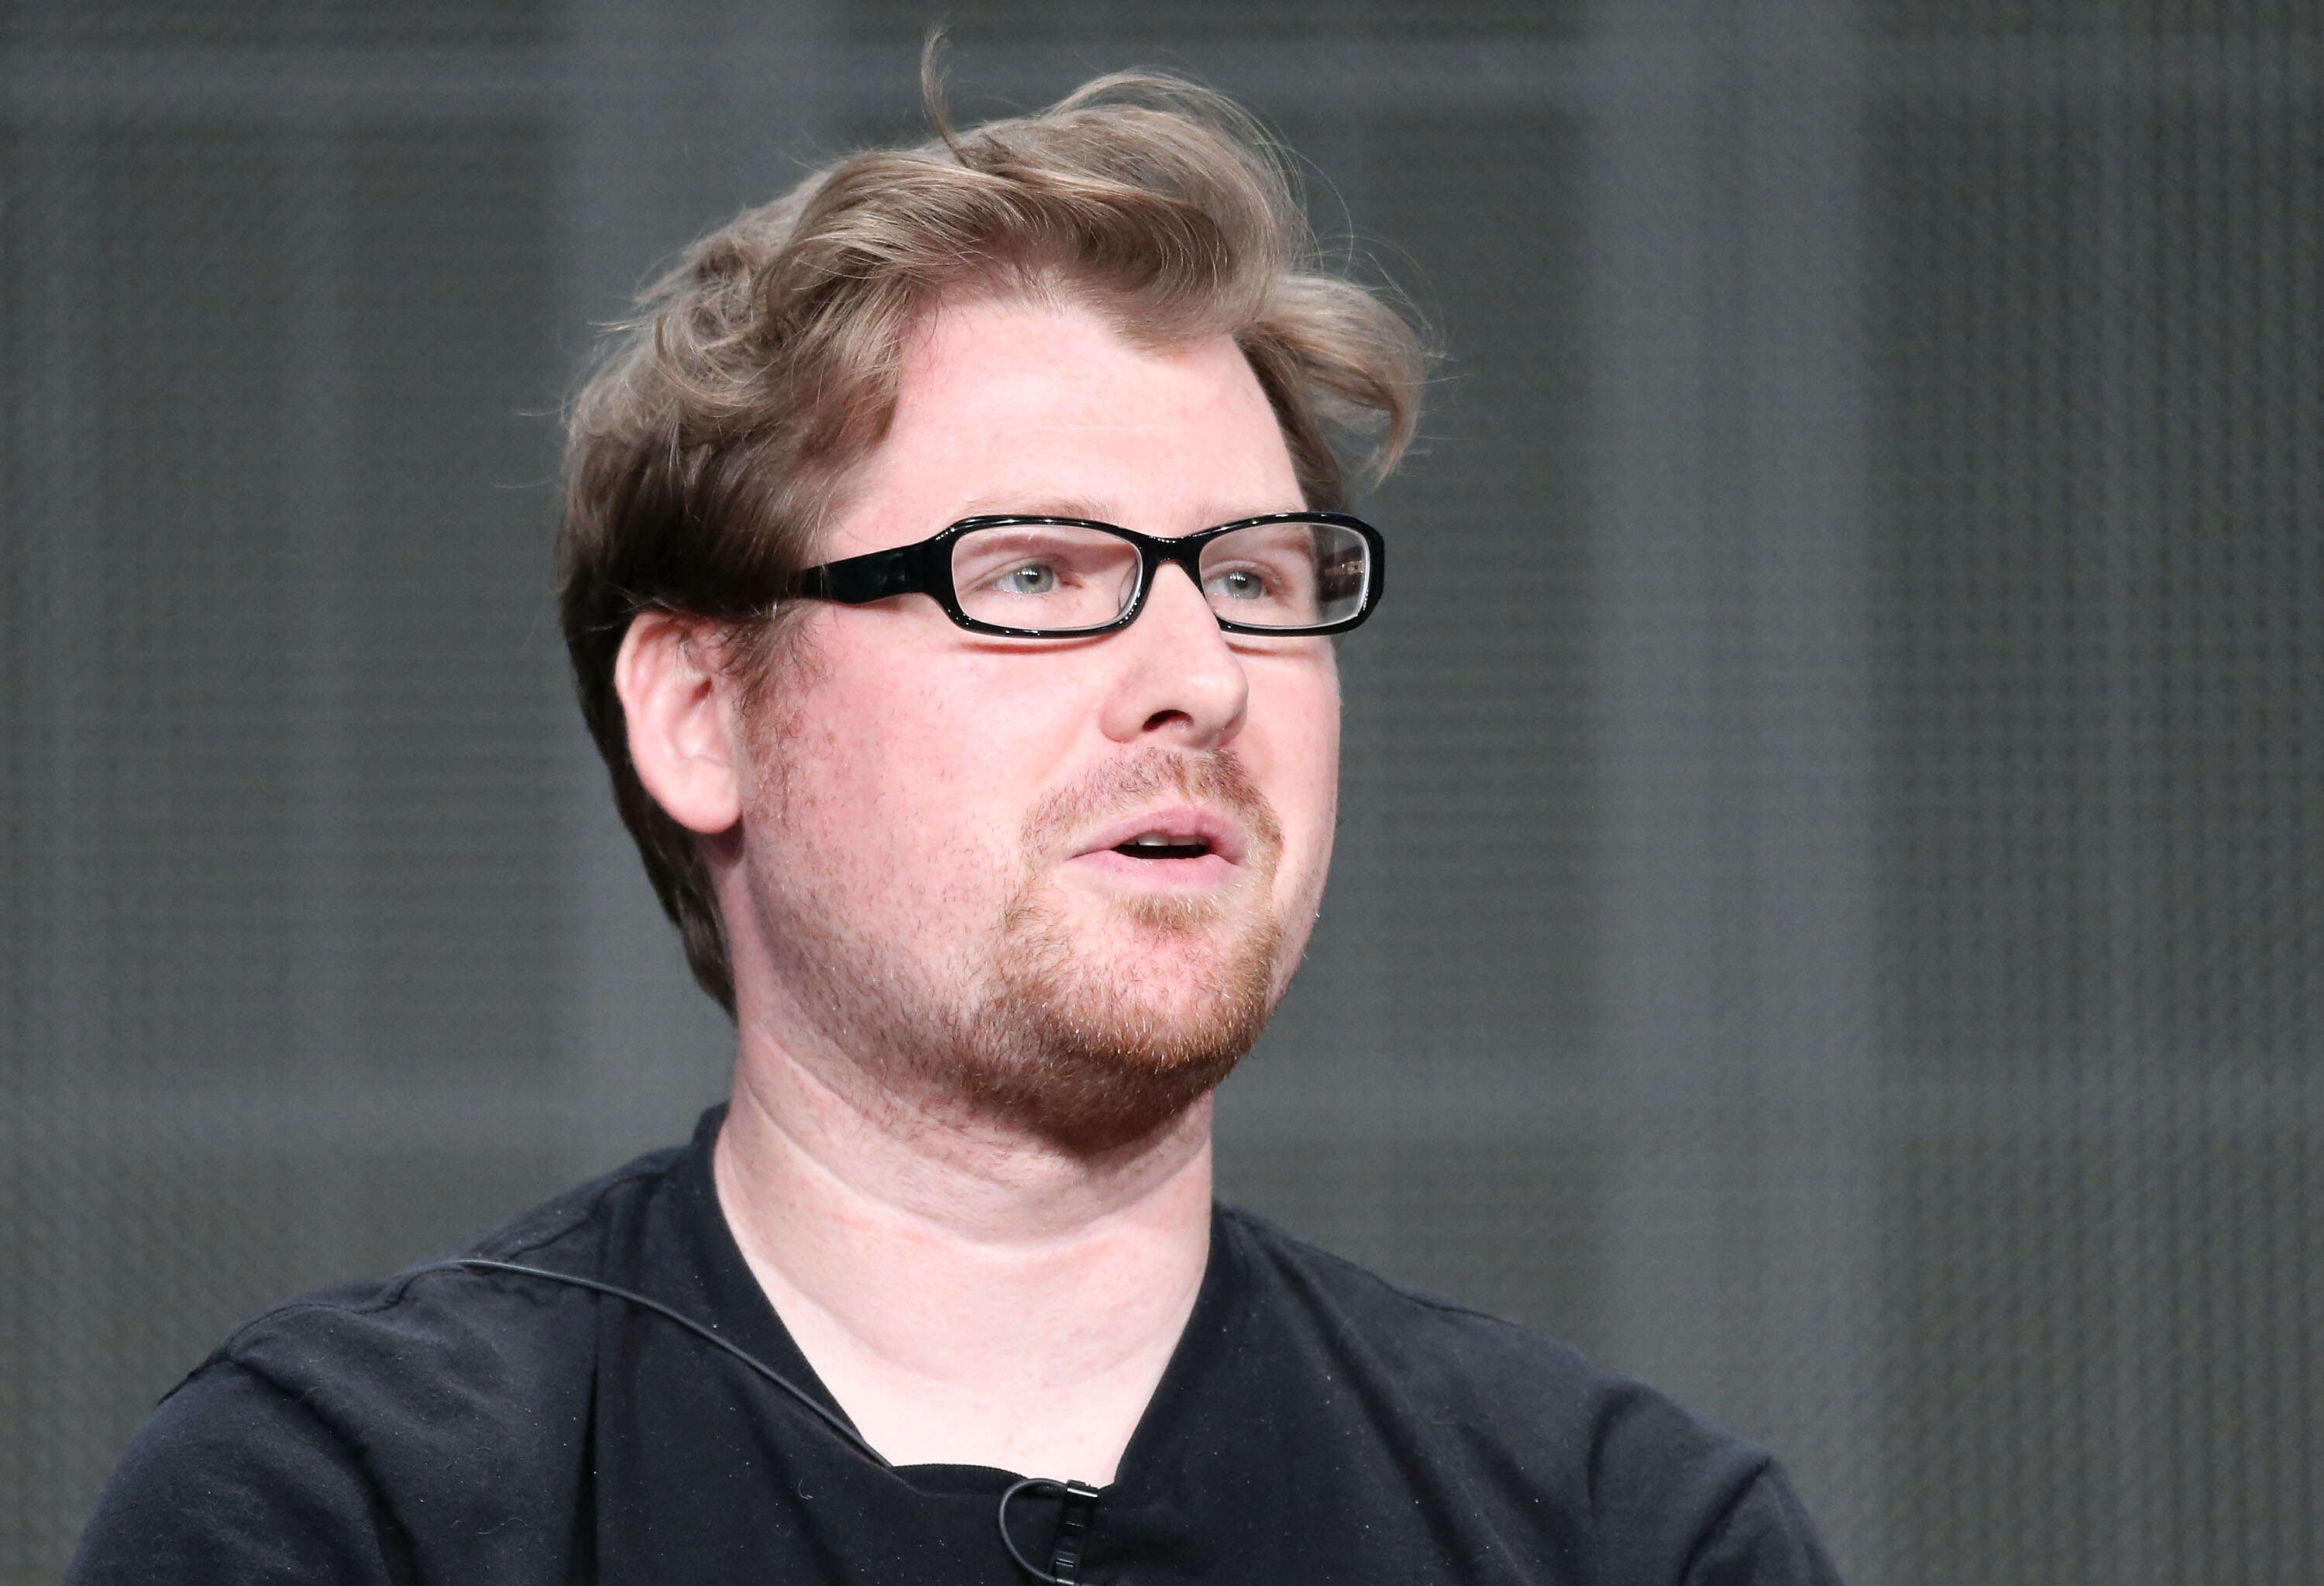 BEVERLY HILLS, CA - JULY 24: Producer Justin Roiland speaks onstage during the Adult Swim: Rick and Morty panel at the Turner Broadcasting portion of the 2013 Summer Television Critics Association tour at the Beverly Hilton Hotel on July 24, 2013 in Beverly Hills, California .  Frederick M. Brown/Getty Images/AFP (Photo by Frederick M. Brown/GETTY IMAGES NORTH AMERICA/Getty Images via AFP)